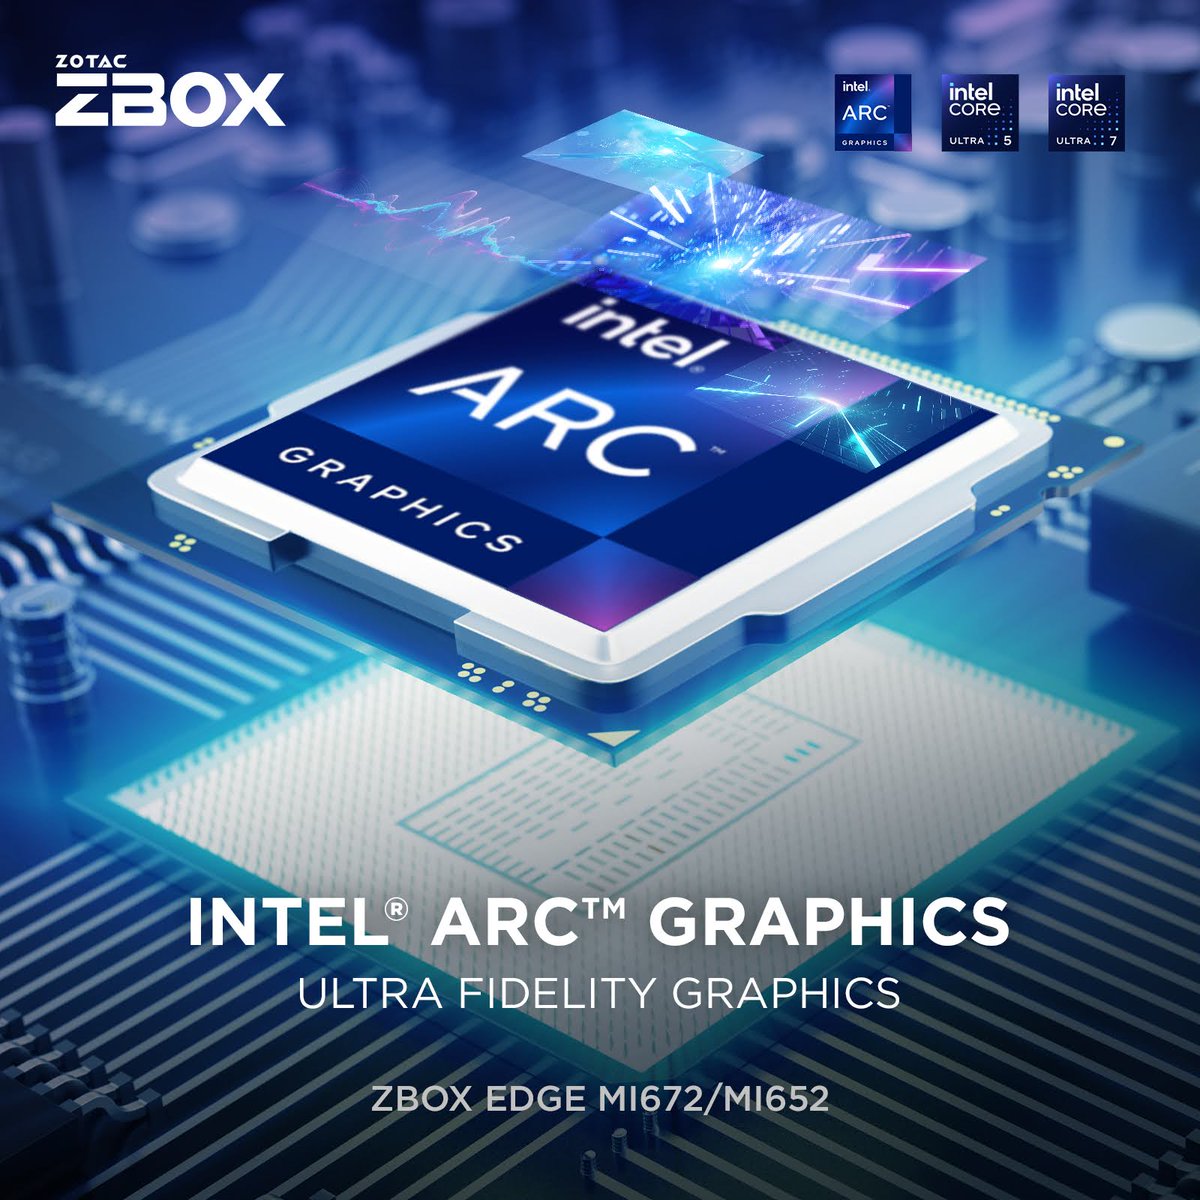 Would you game on Intel ARC Graphics in a tiny low-profile 0.64 liter mini PC? Learn more - bit.ly/3TRIiRk #ZOTAC #ZBOX #MI672 #MI652